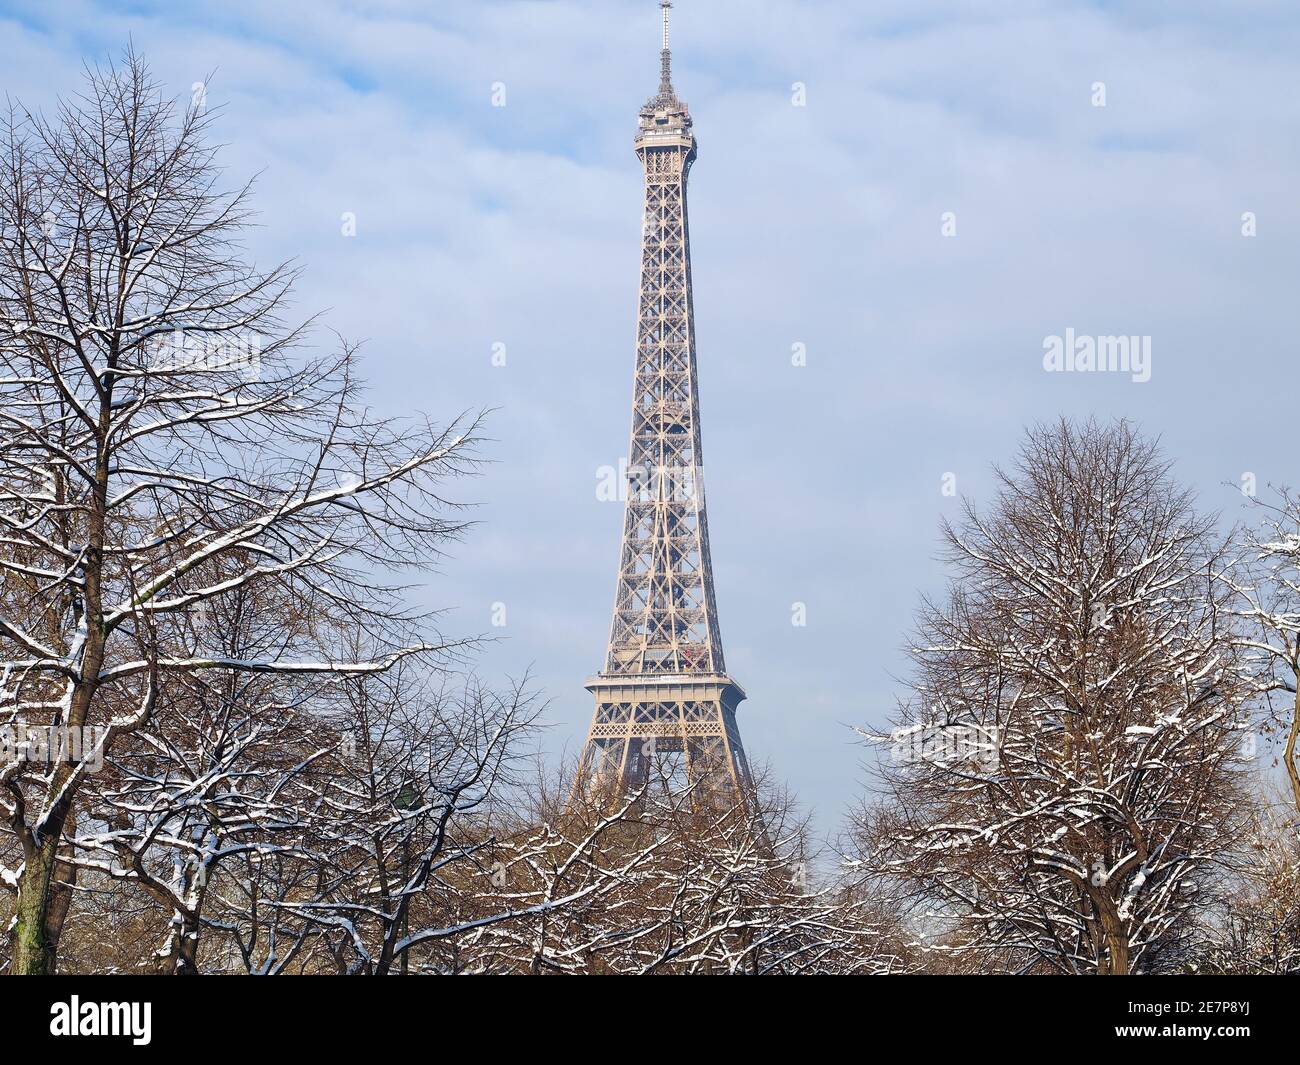 Winter in Paris. Snowy park with Eiffel Tower. Stock Photo